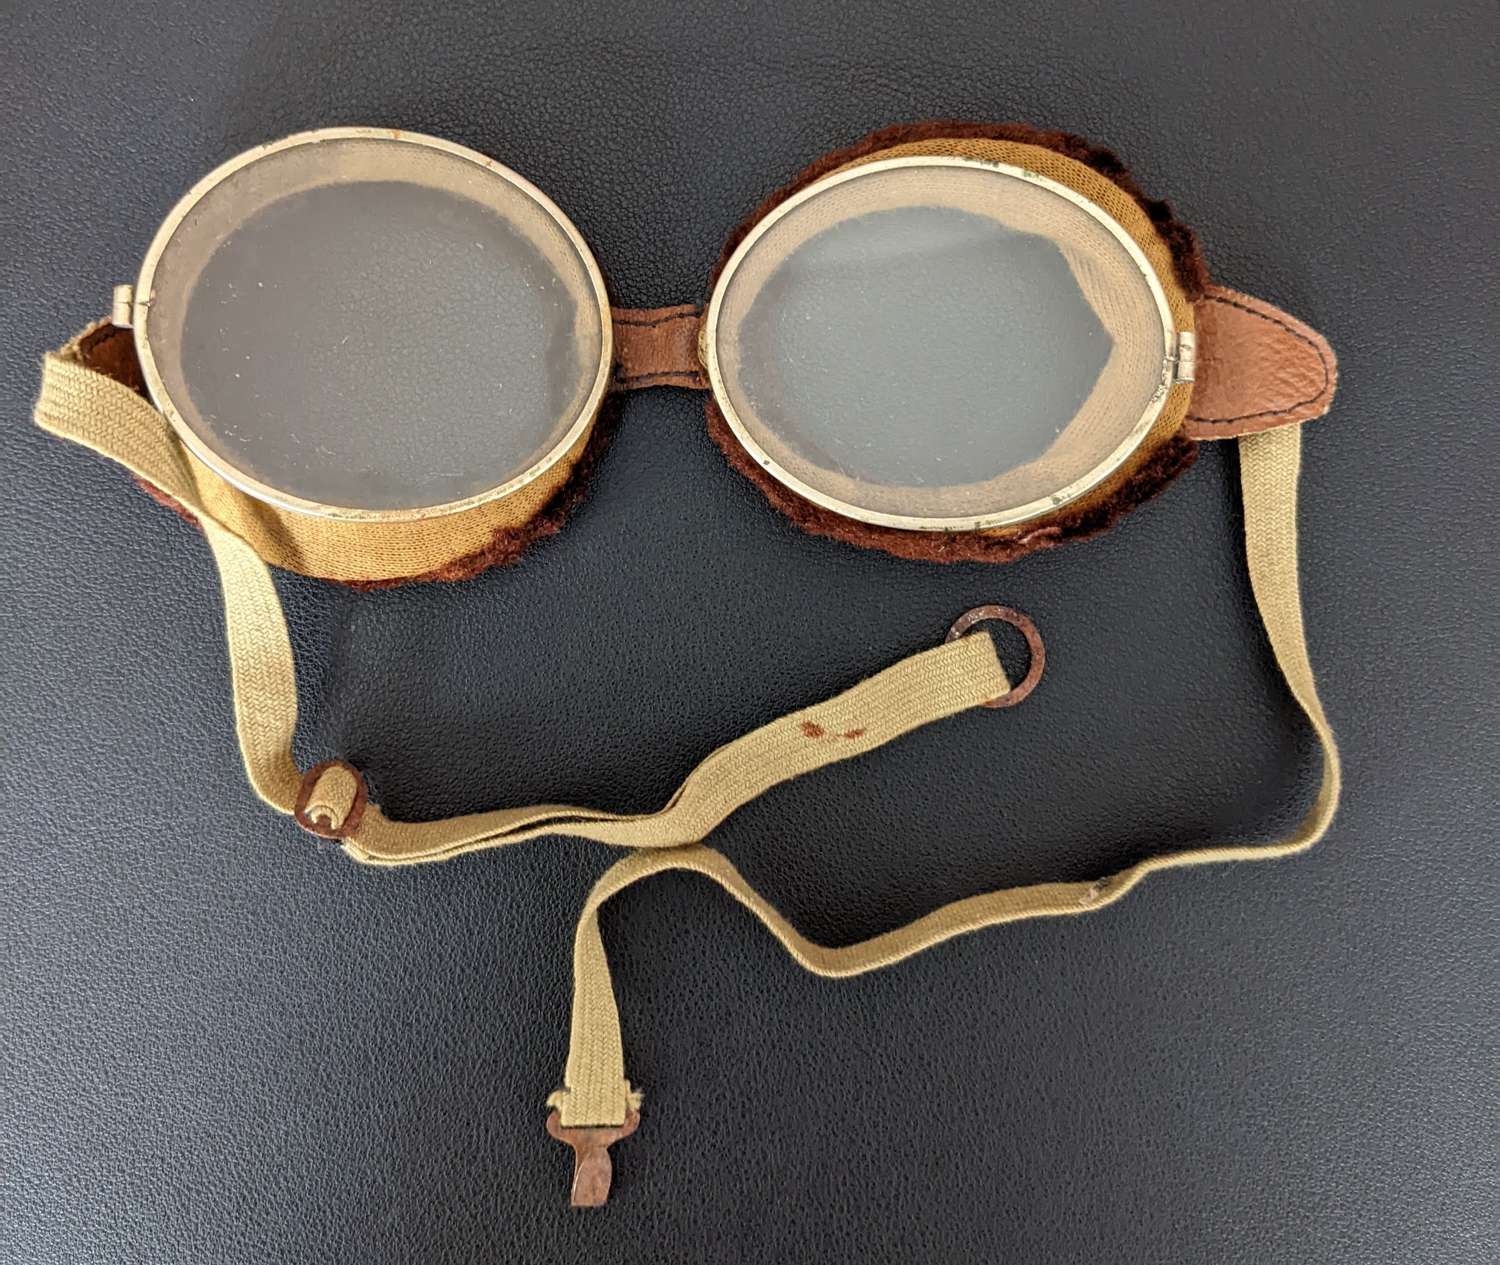 Royal Flying Corps Aviation Goggles 1917 Pattern